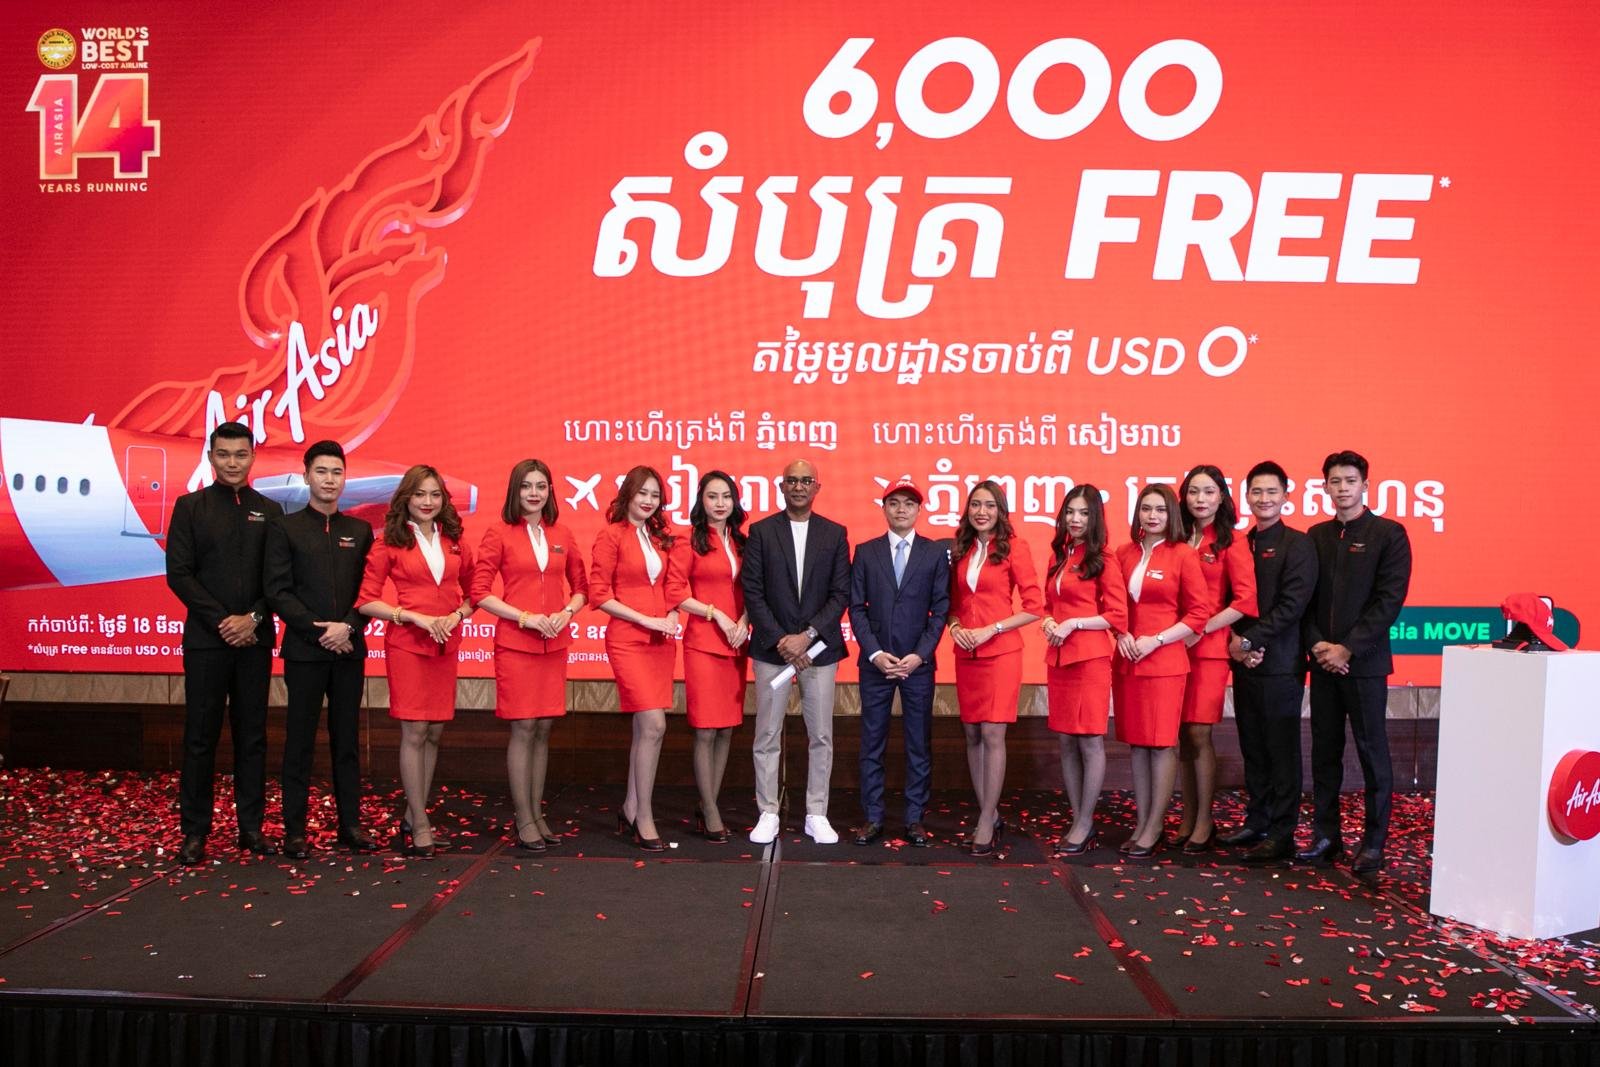  Photo Caption: (Seventh from the left) - Bo Lingam, Group CEO of AirAsia Aviation Group, and Vissoth Nam, AirAsia Cambodia CEO, at the AirAsia Cambodia Press Conference at Hyatt Regency, Phnom Penh 